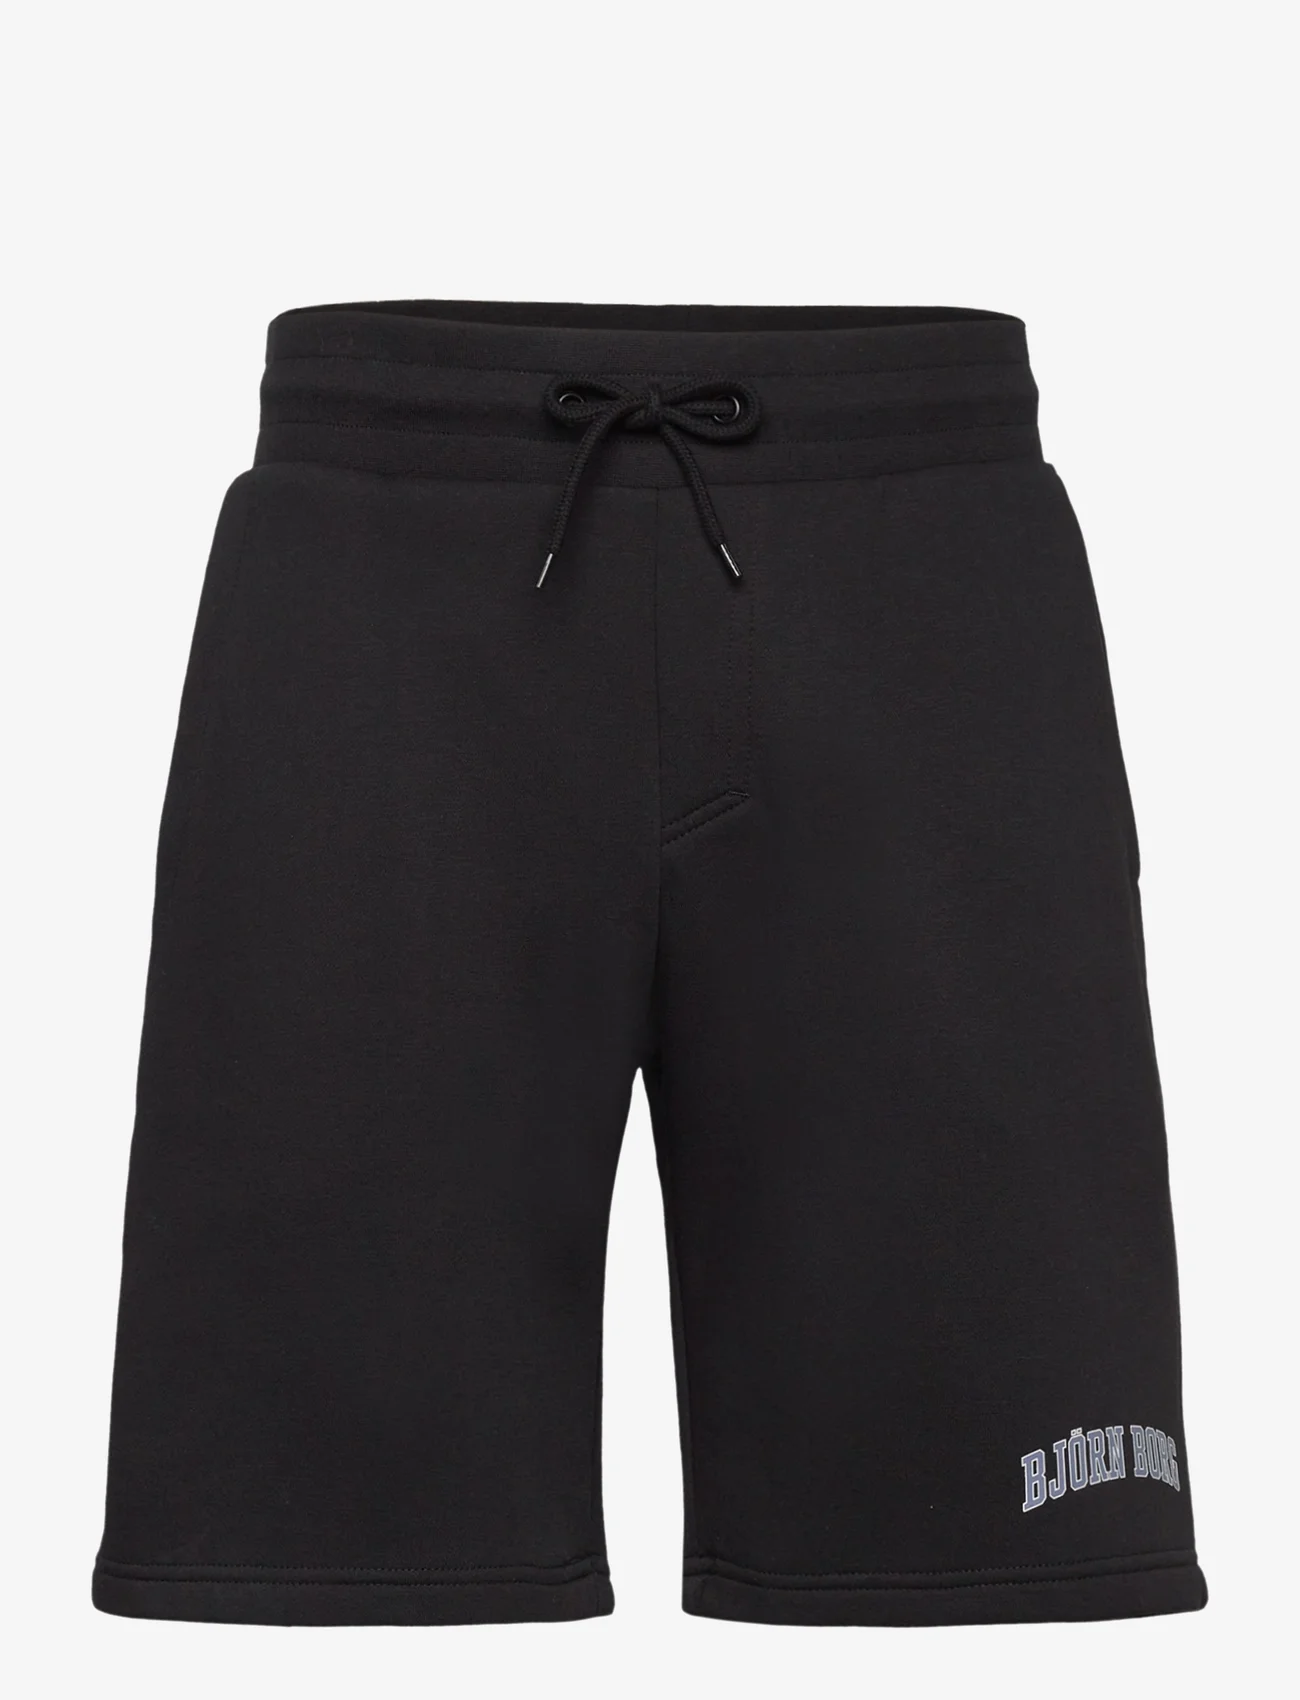 Björn Borg - BORG ESSENTIAL SHORTS - lowest prices - black beauty - 0